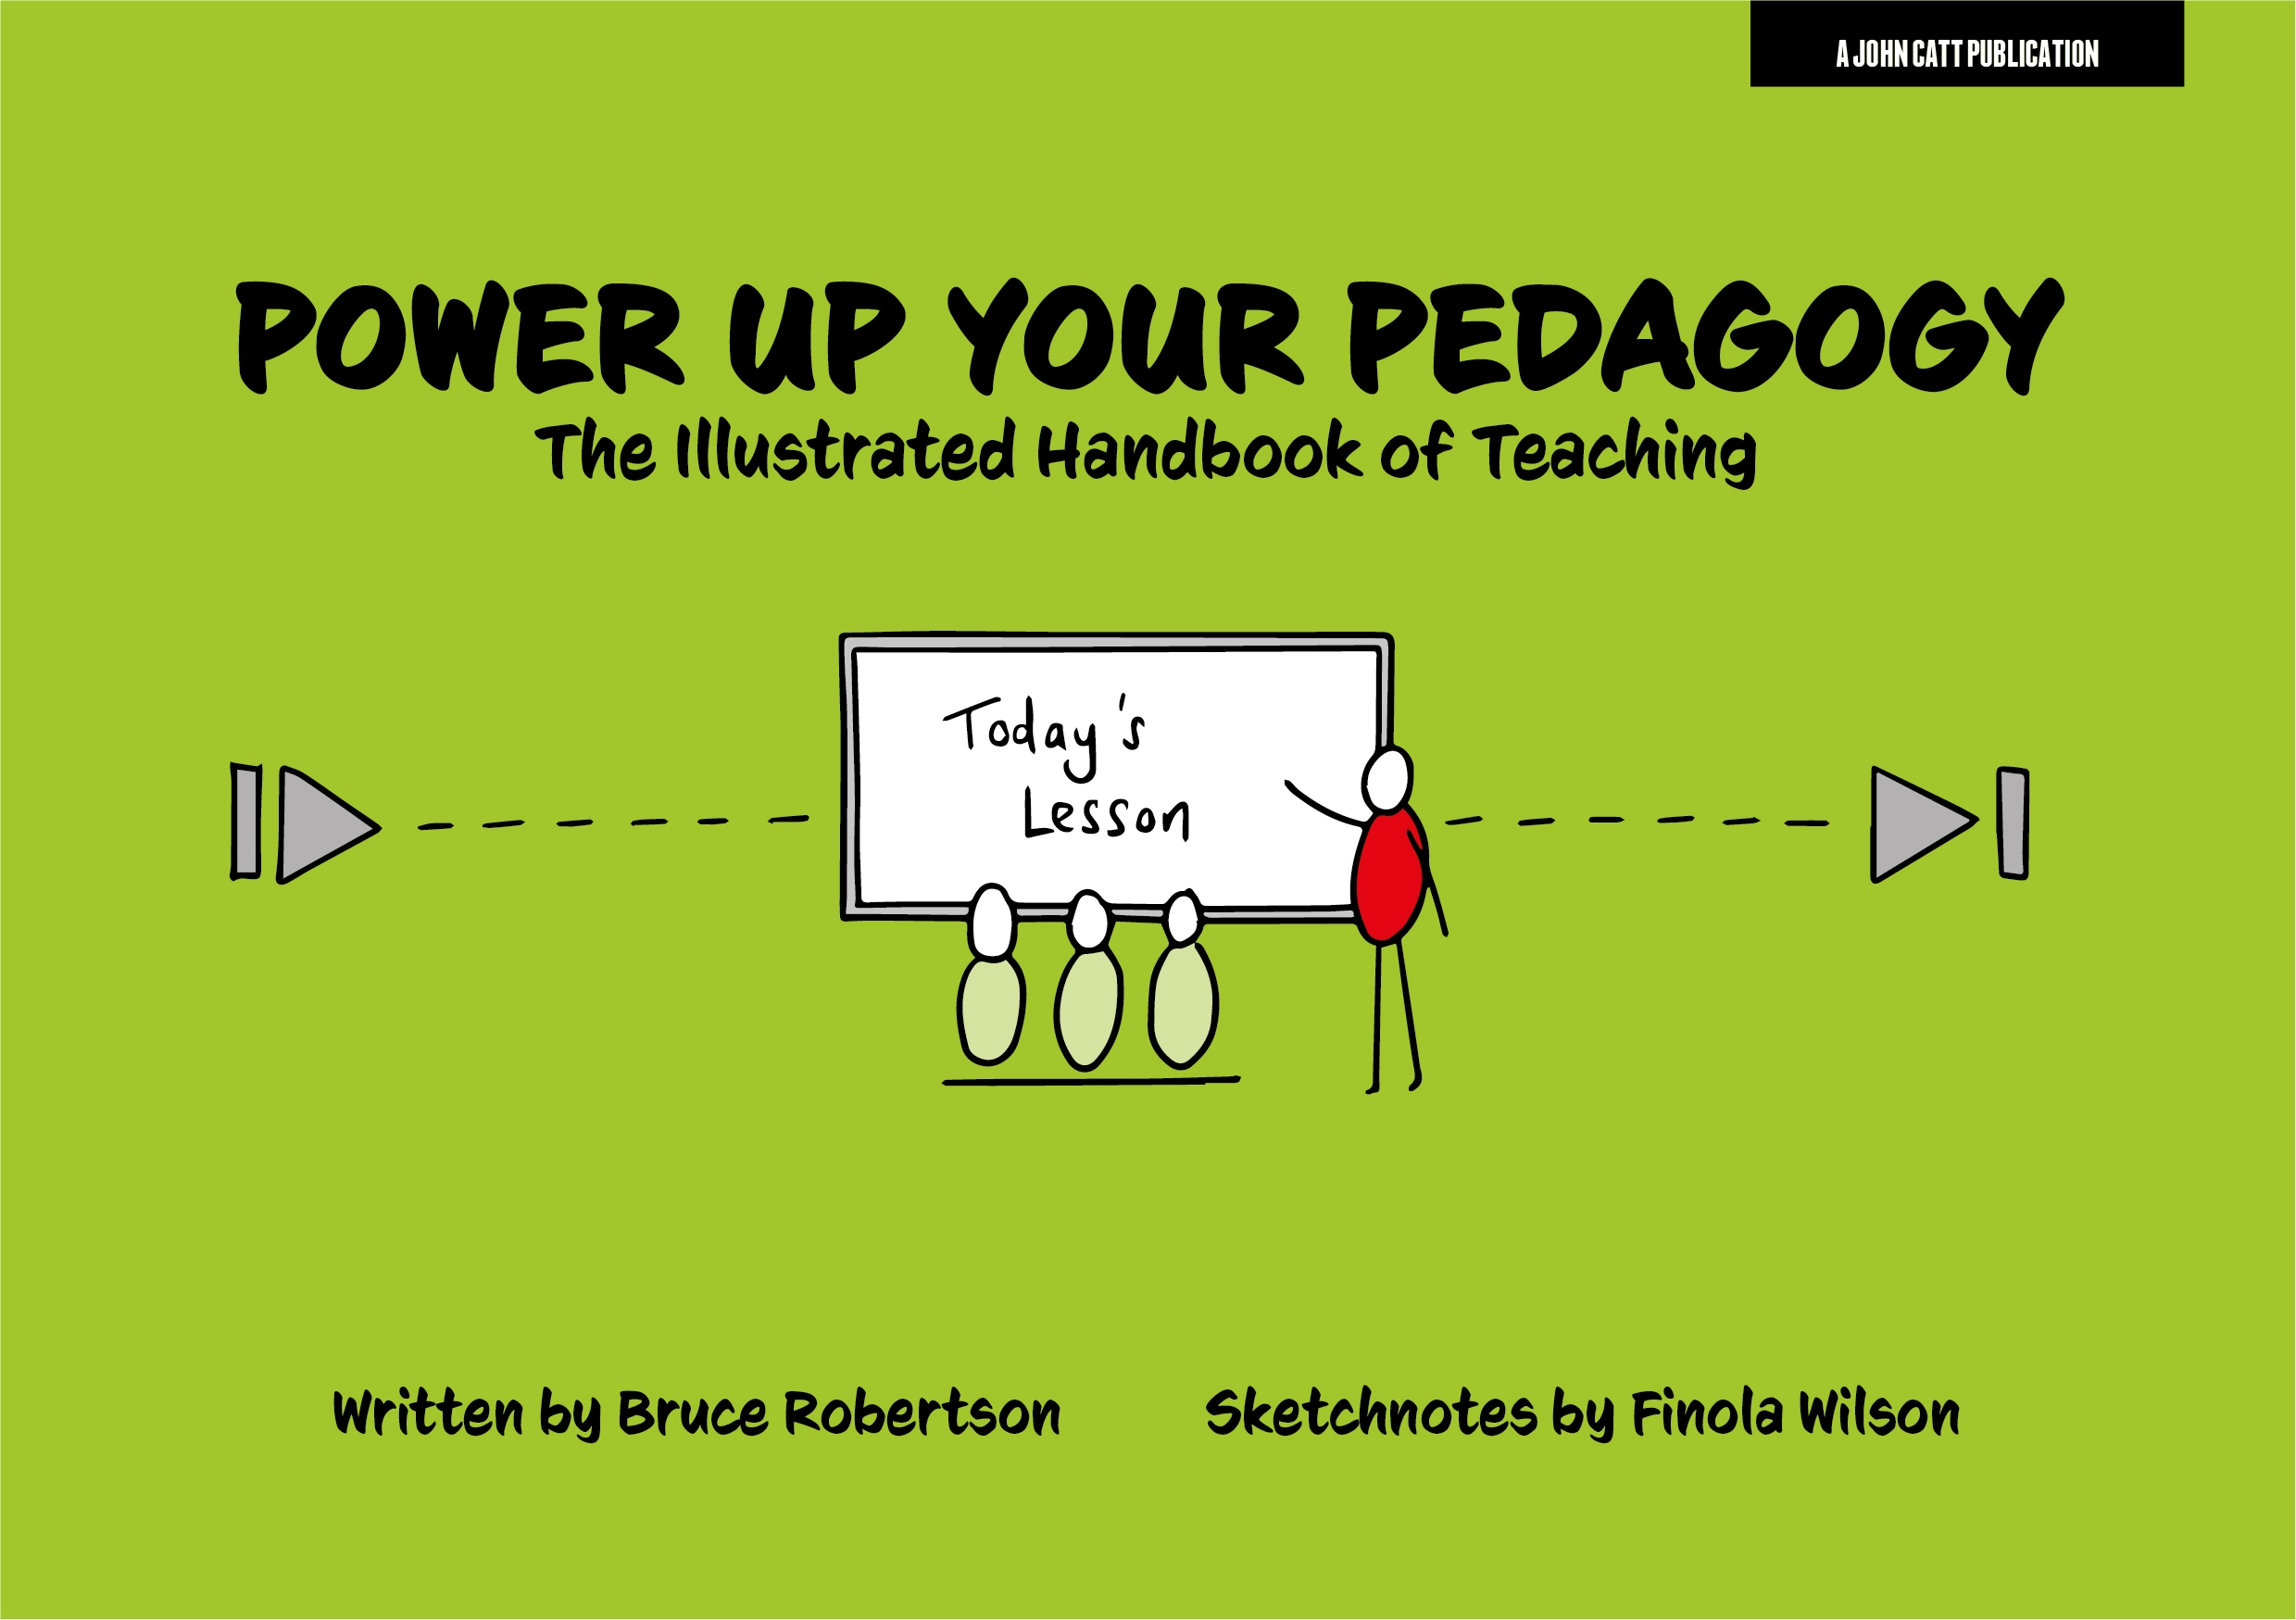 Featured image for “Power Up Your Pedagogy: The Illustrated Handbook of Teaching”